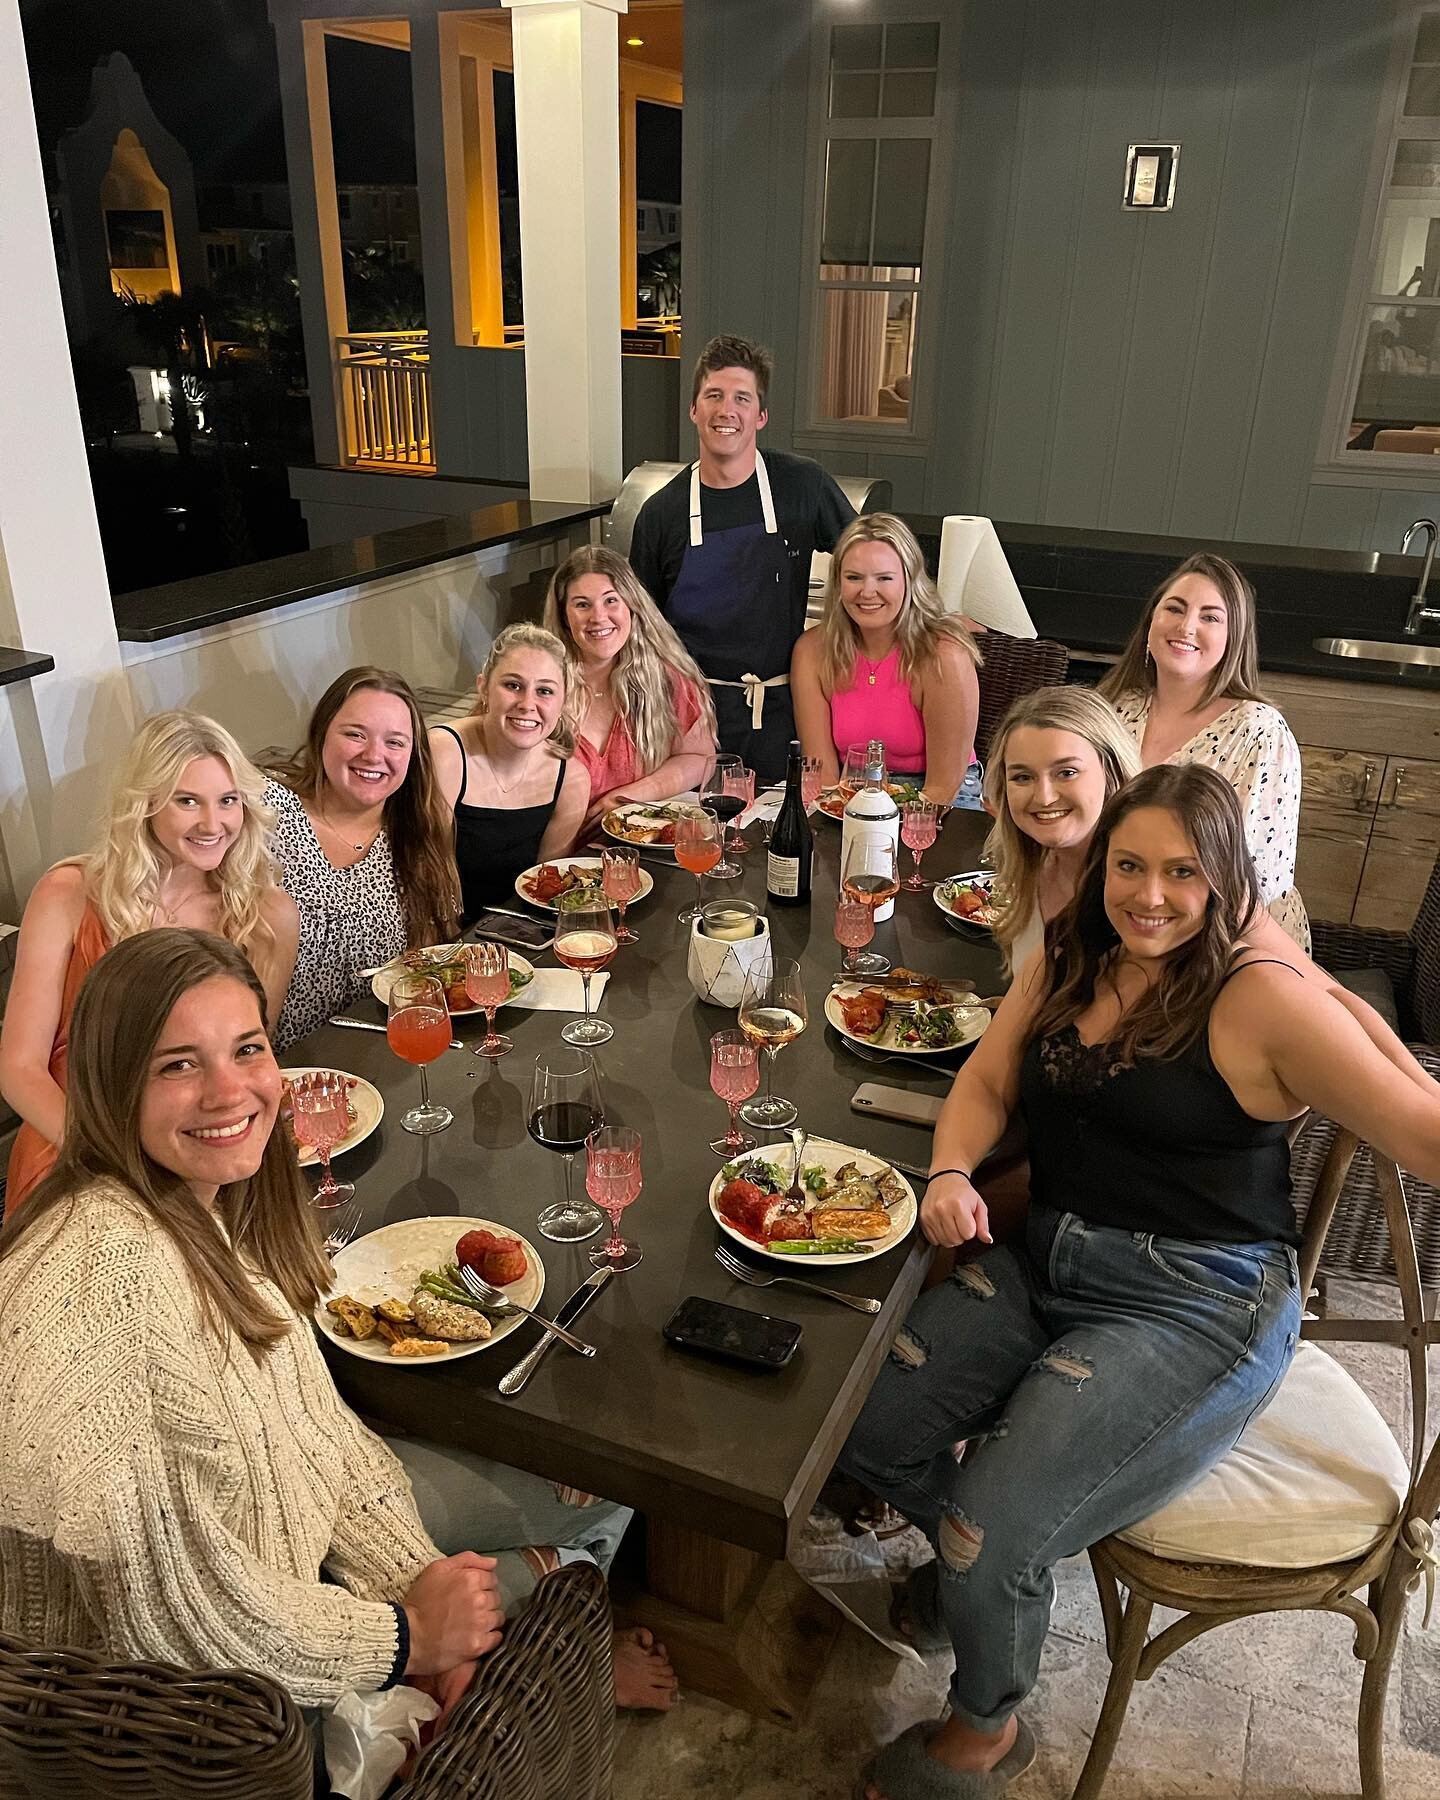 Chef Nathan gave these ladies a meal to remember! Parmesan arancini, citrus mixed green salad, cast iron seared Atlantic salmon, rosemary &amp; lemon grilled @joycefarms fresh chicken breast, roasted asparagus &amp; fingerling potatoes, finished off 